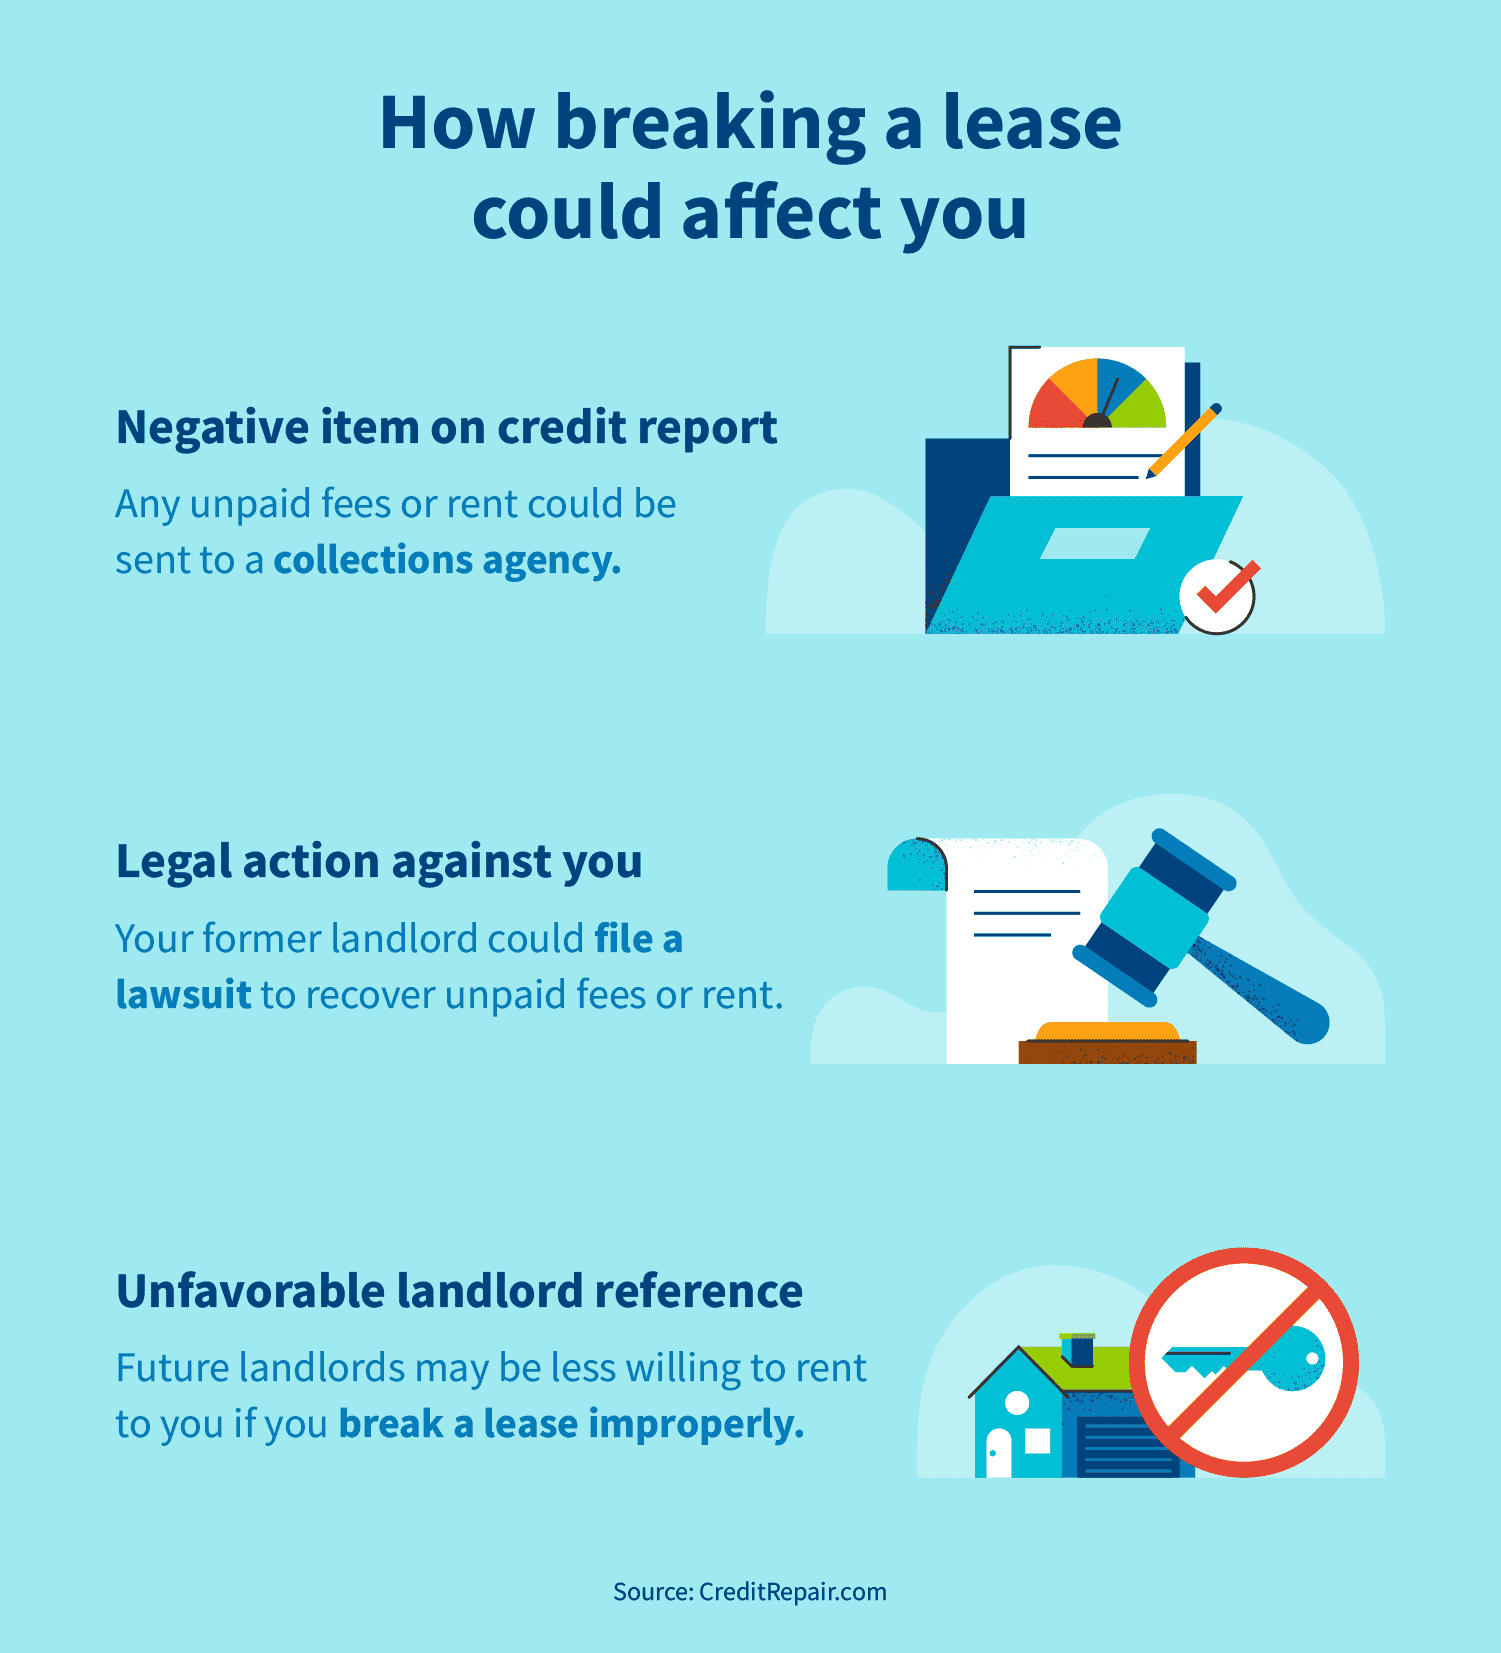 Does breaking a lease affect your credit?